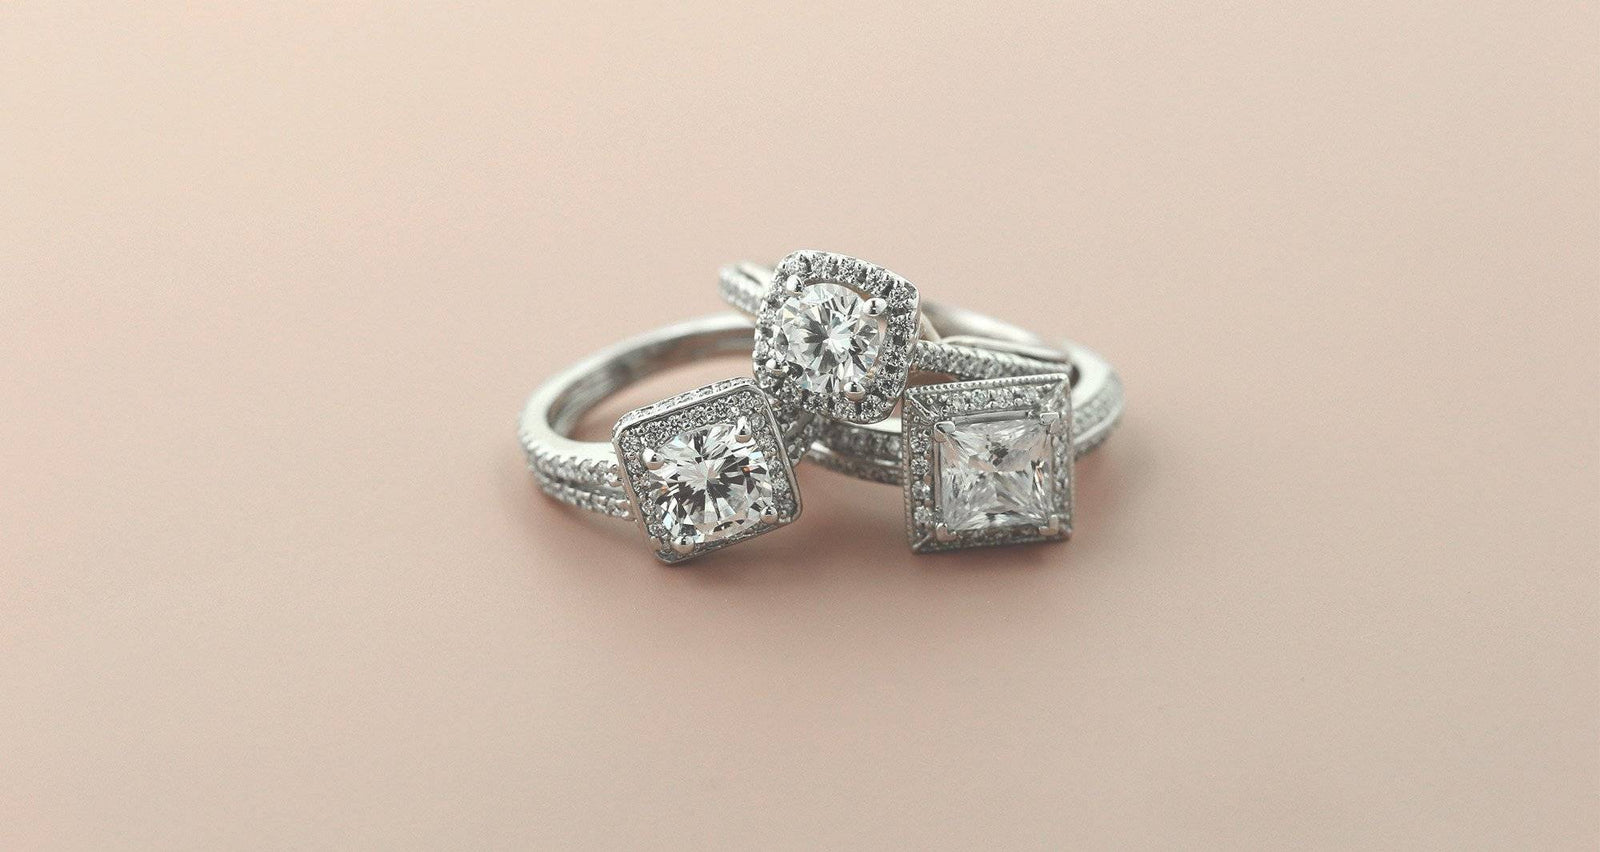 How can stores like JCPenney and Kay sell authentic diamond rings for only  $25? - Quora